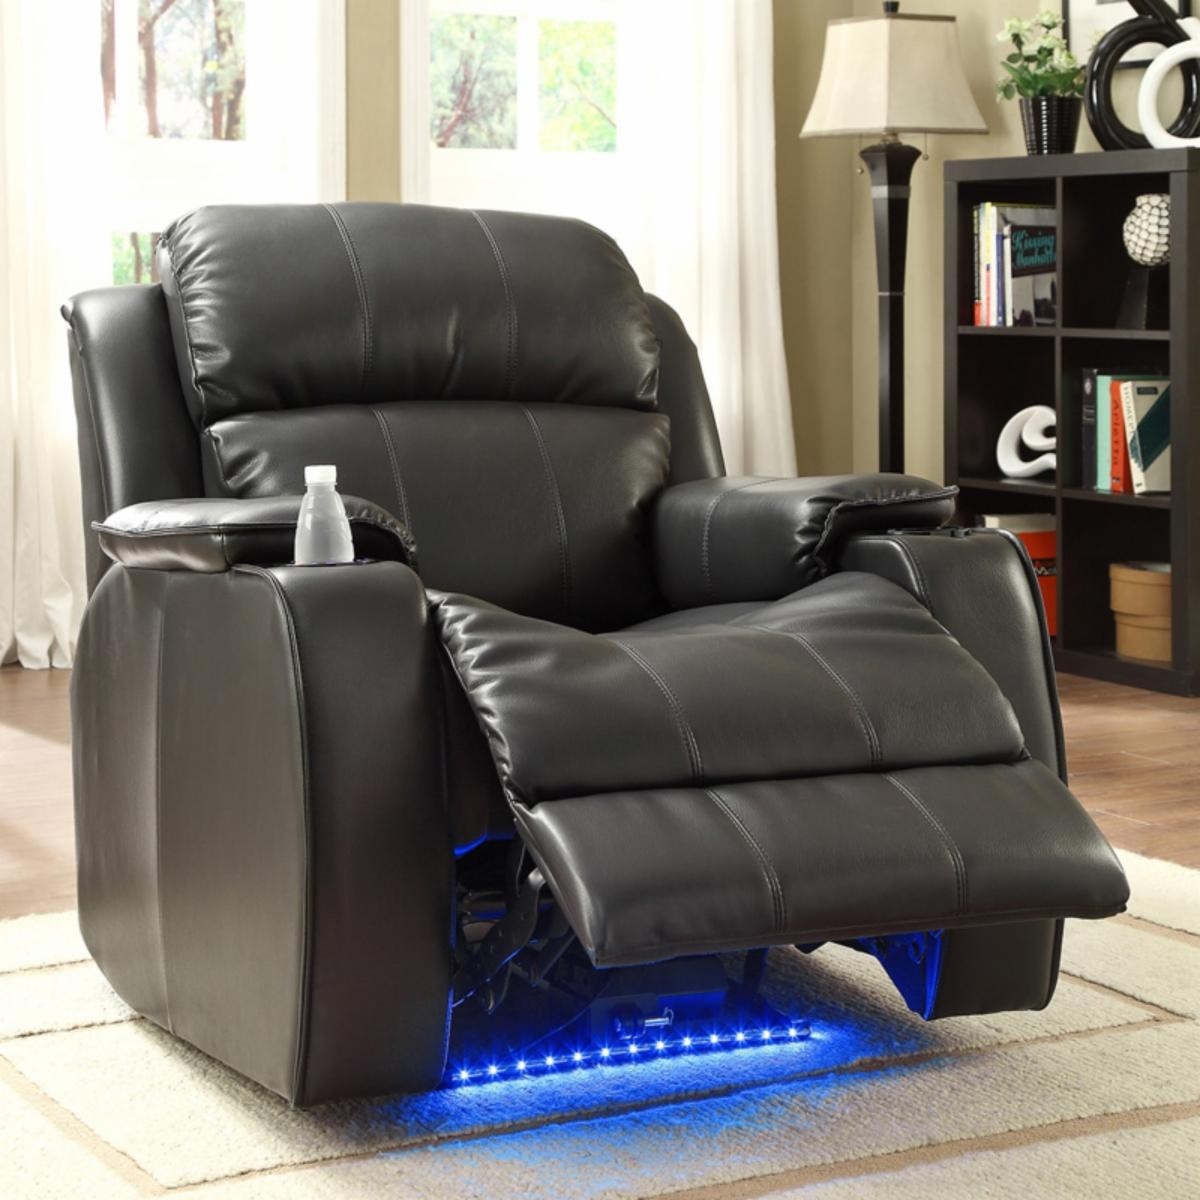 Jimmy Power with Massage, LED and Cup Holder Recliner